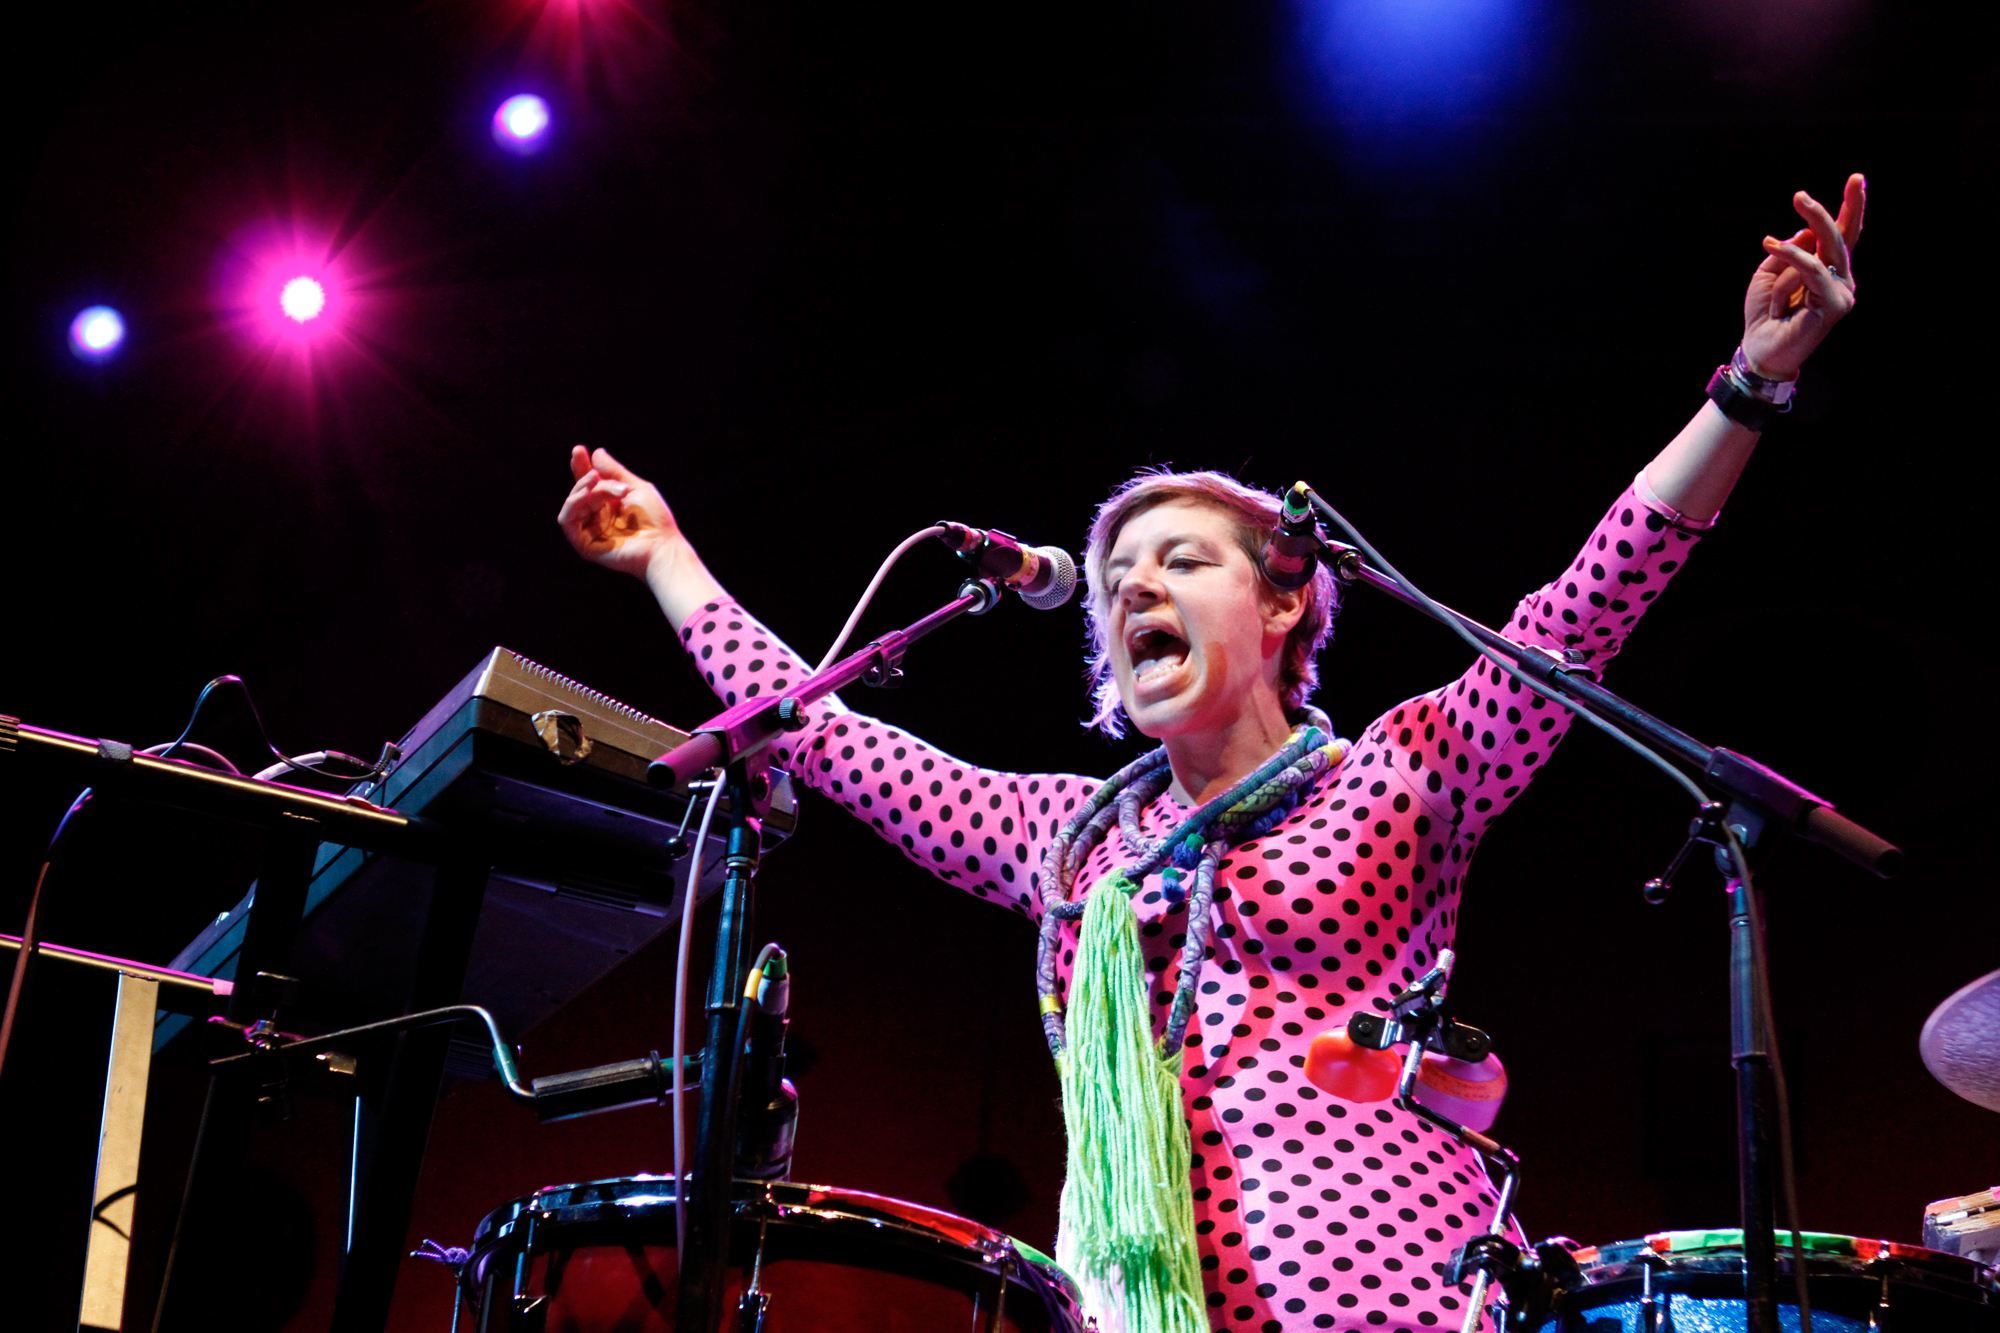 tUnE-yArDs performs at Celebrate Brooklyn at Prospect Park in Brooklyn, NY on Aug. 8, 2015. (© Michael Katzif – Do not use or republish without prior consent.)